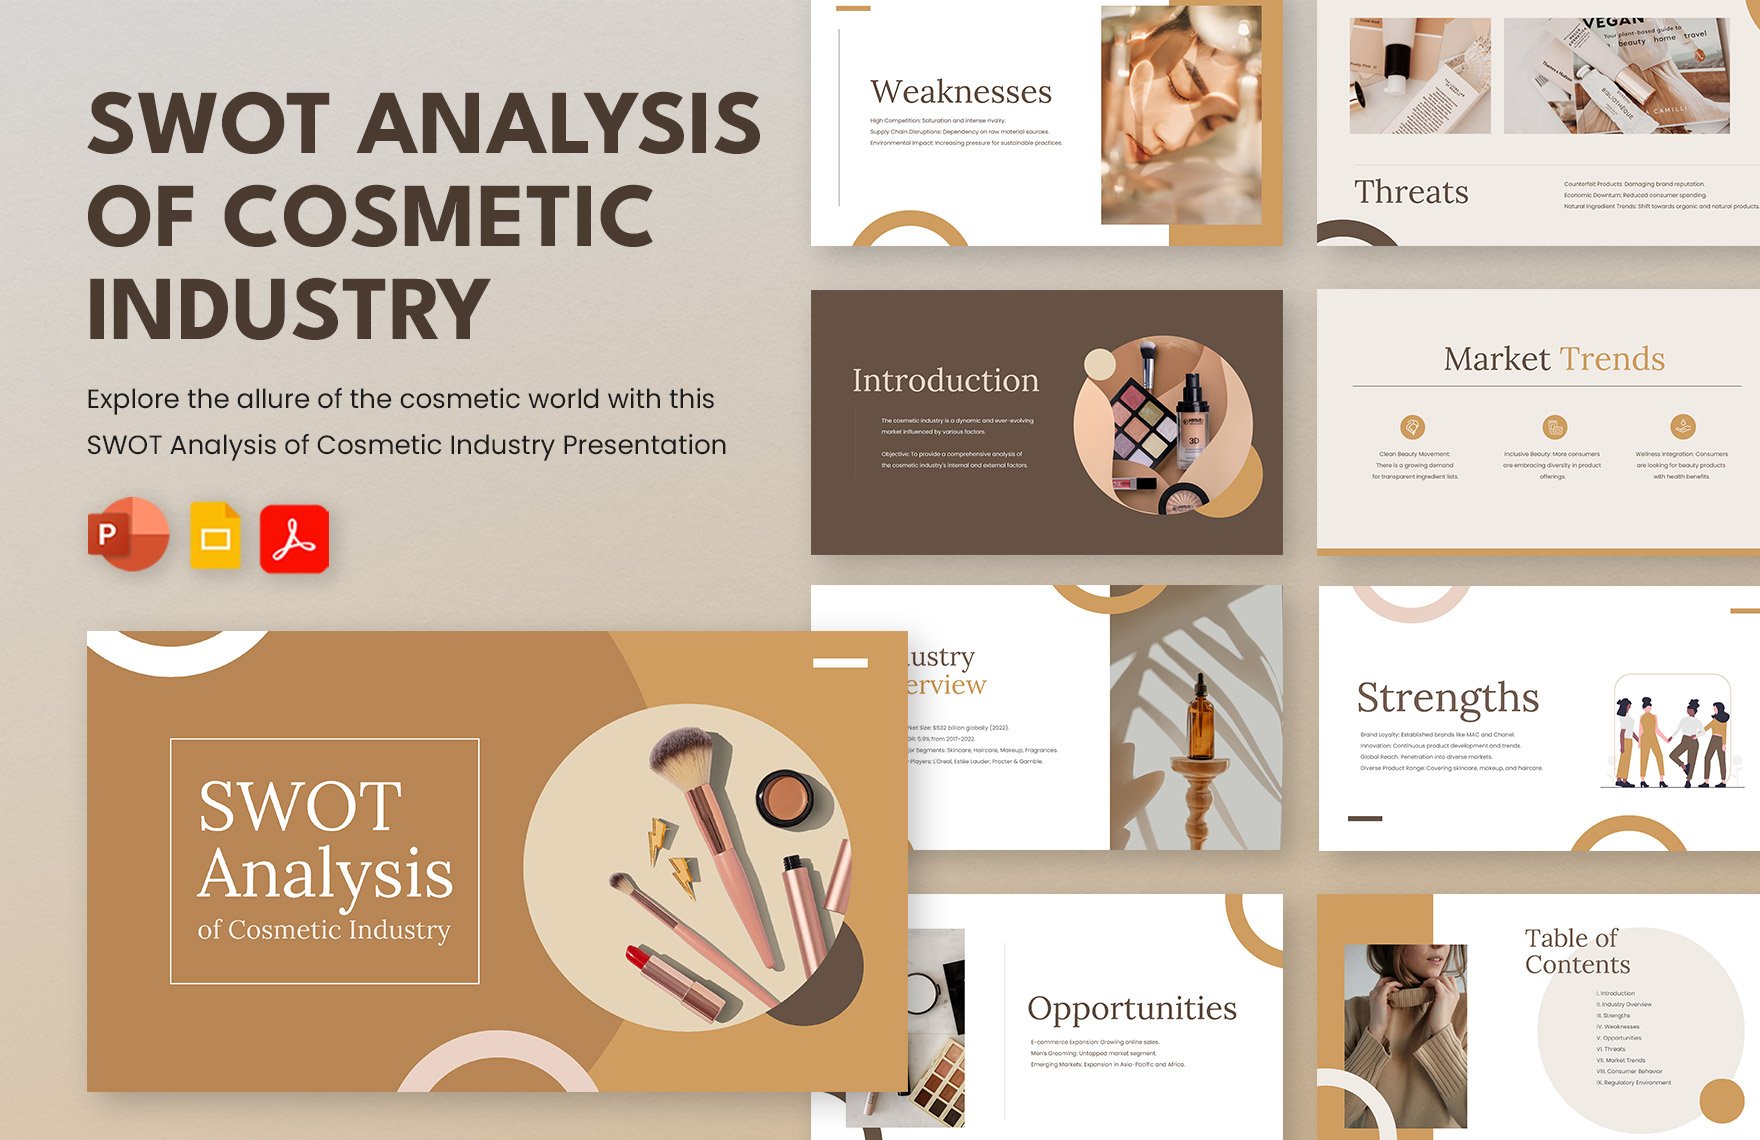 Swot Analysis of Cosmetic Industry